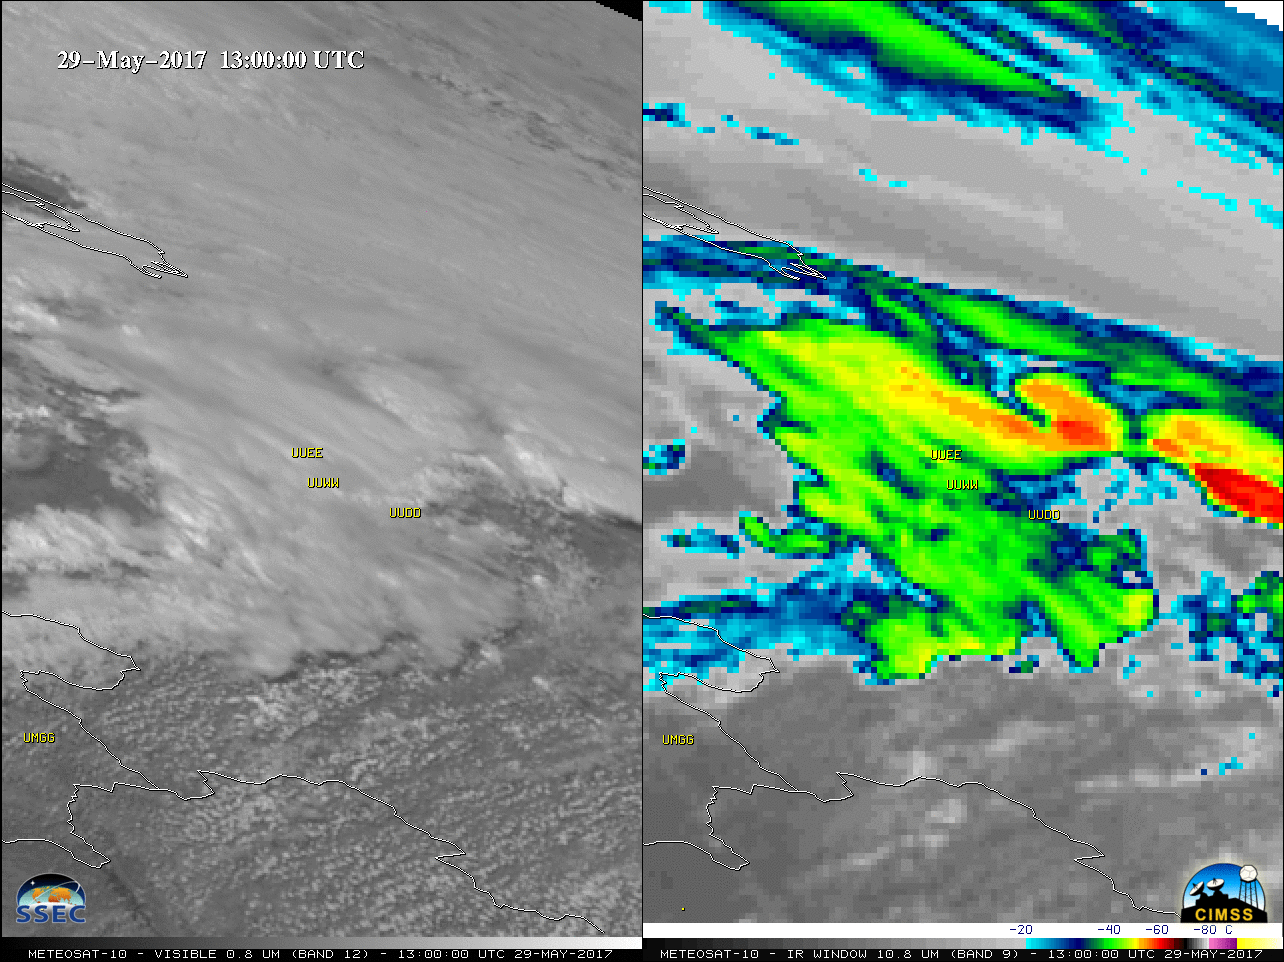 Meteosat-10 Visible (0.8 µm, left) and Infrared Window (10.8 µm, right) images [click to play animation]